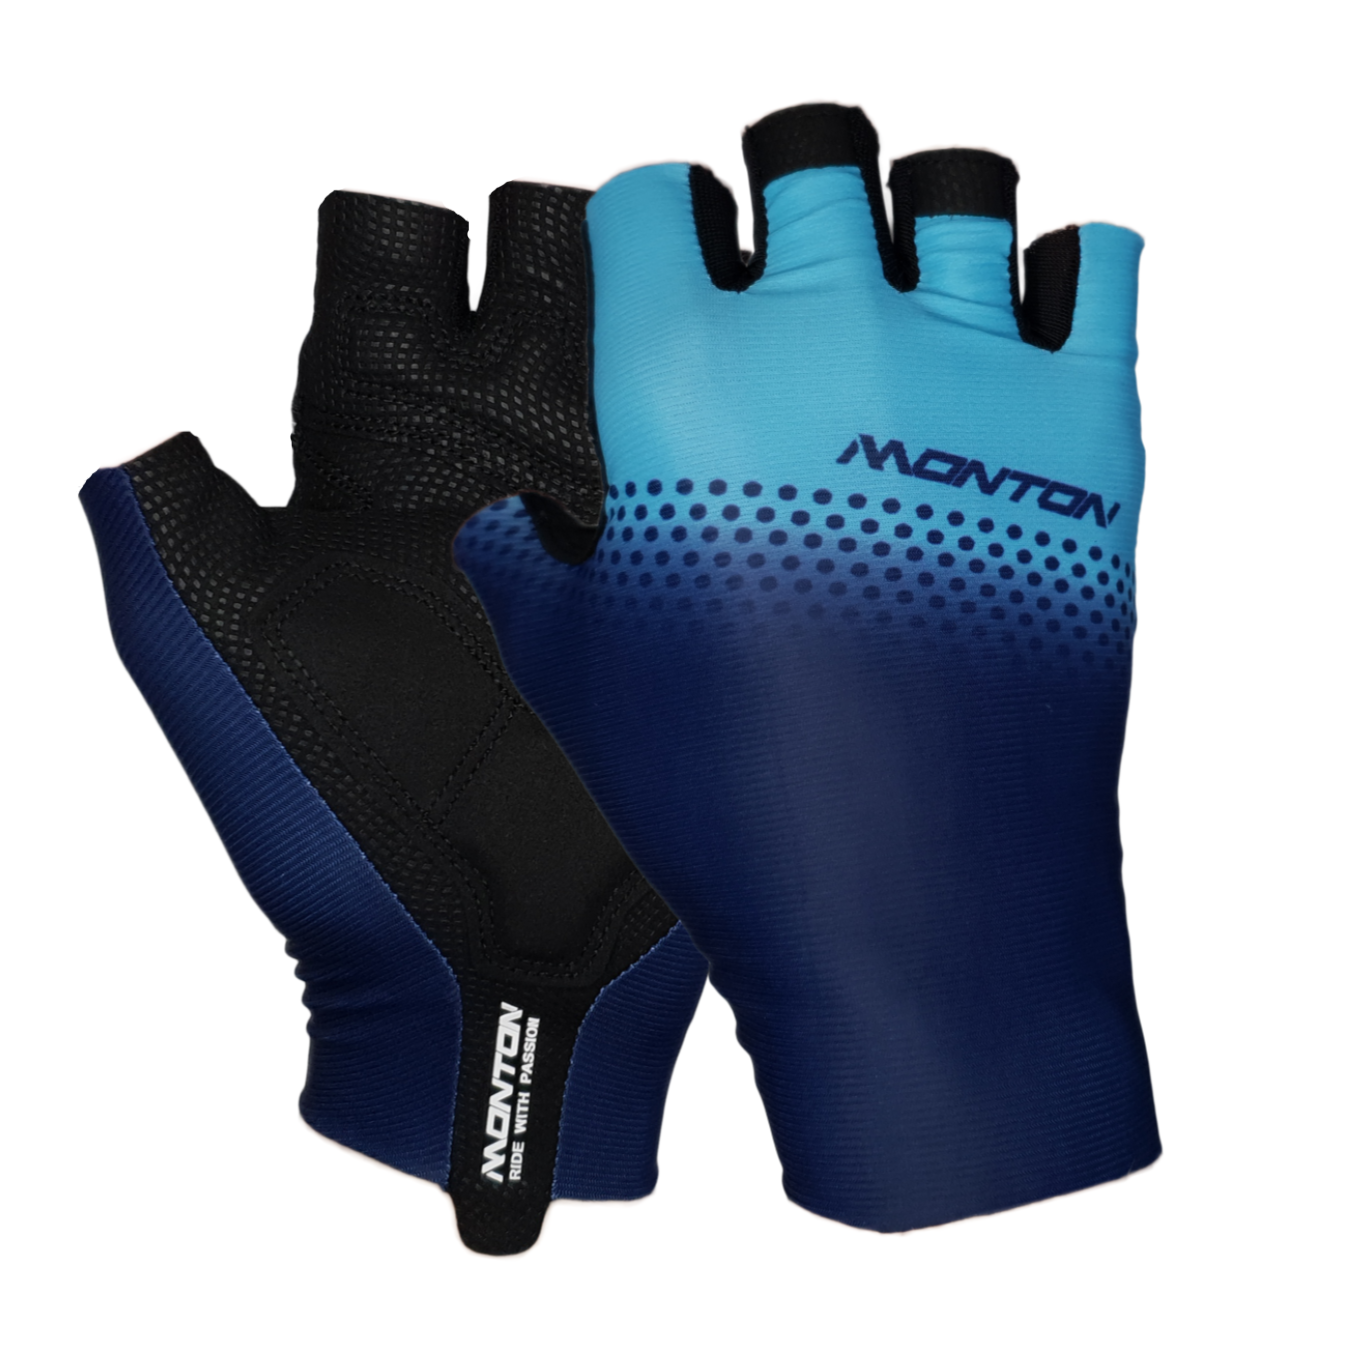 BLUE FADE GLOVES PADDED